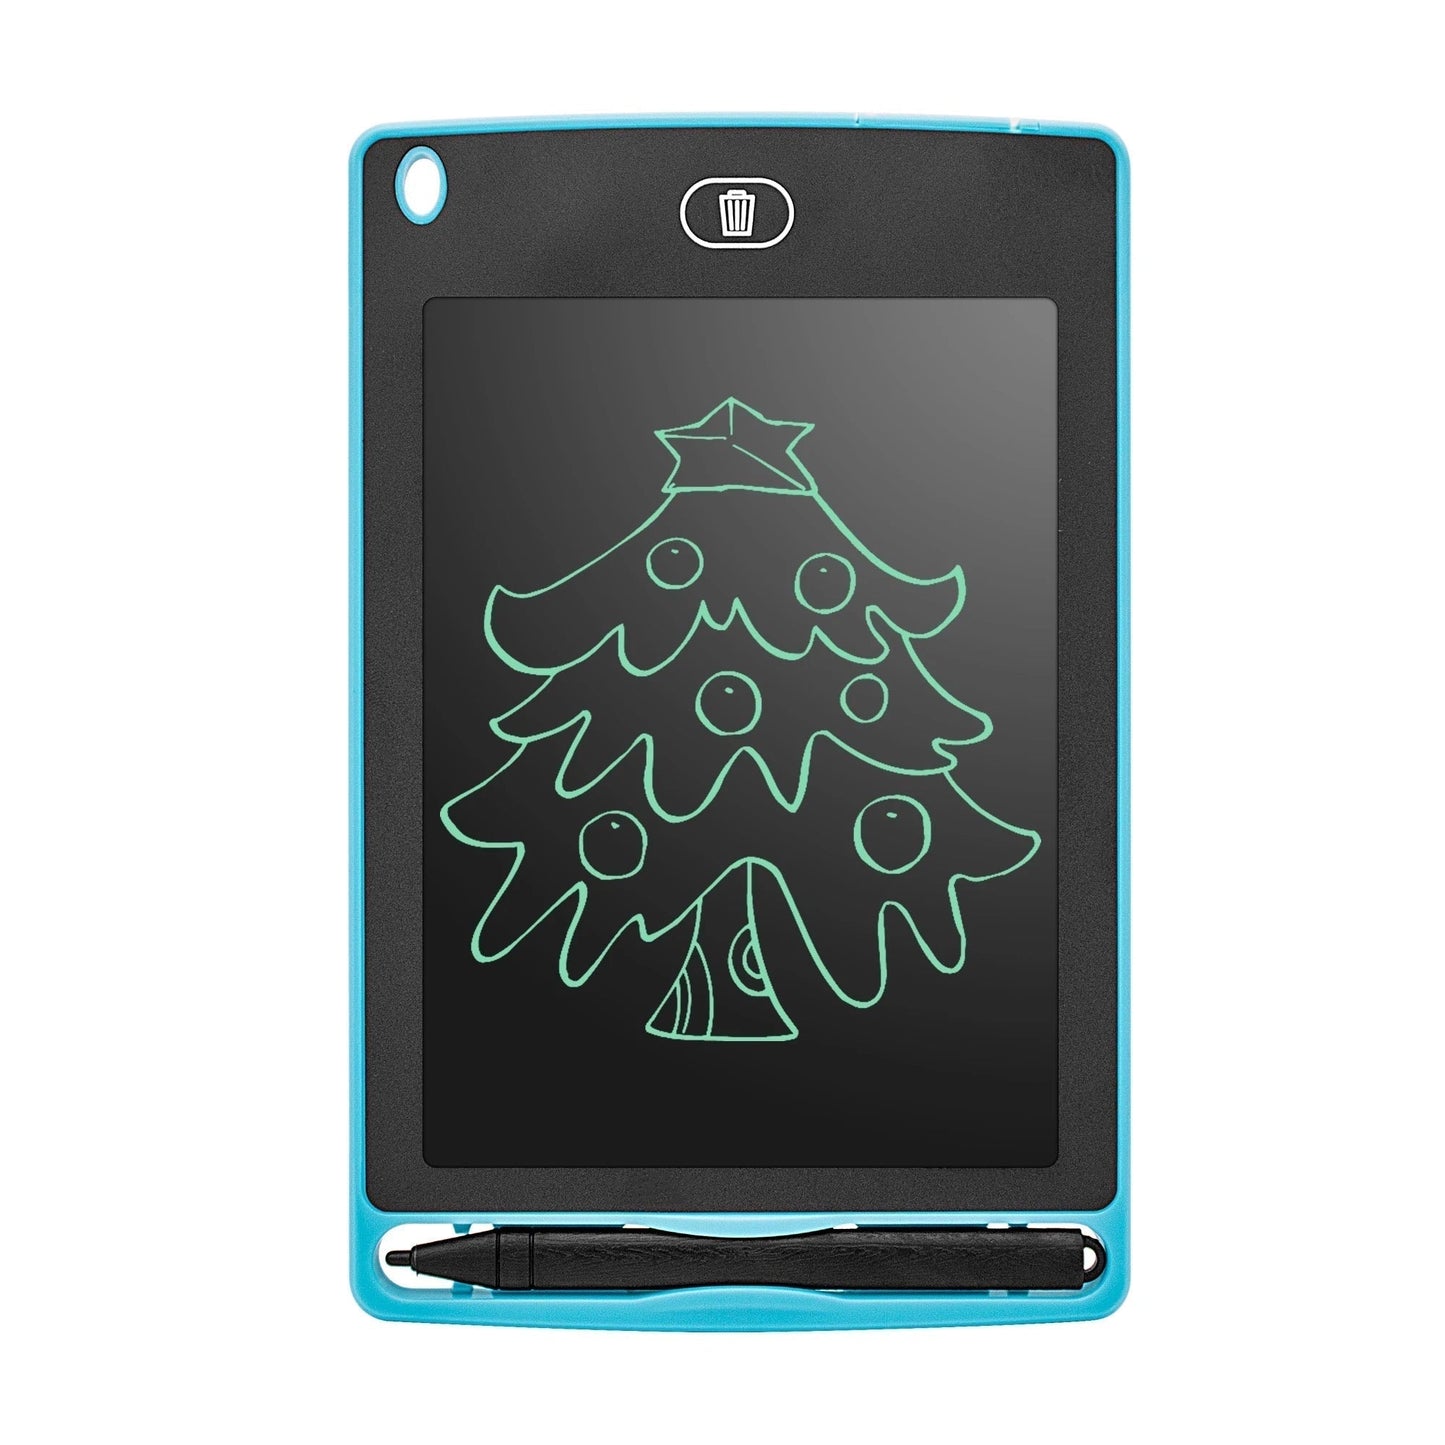 "BrilliantSketch™ LED Kids Digital Drawing Tablet: Write, Draw, and Learn!"